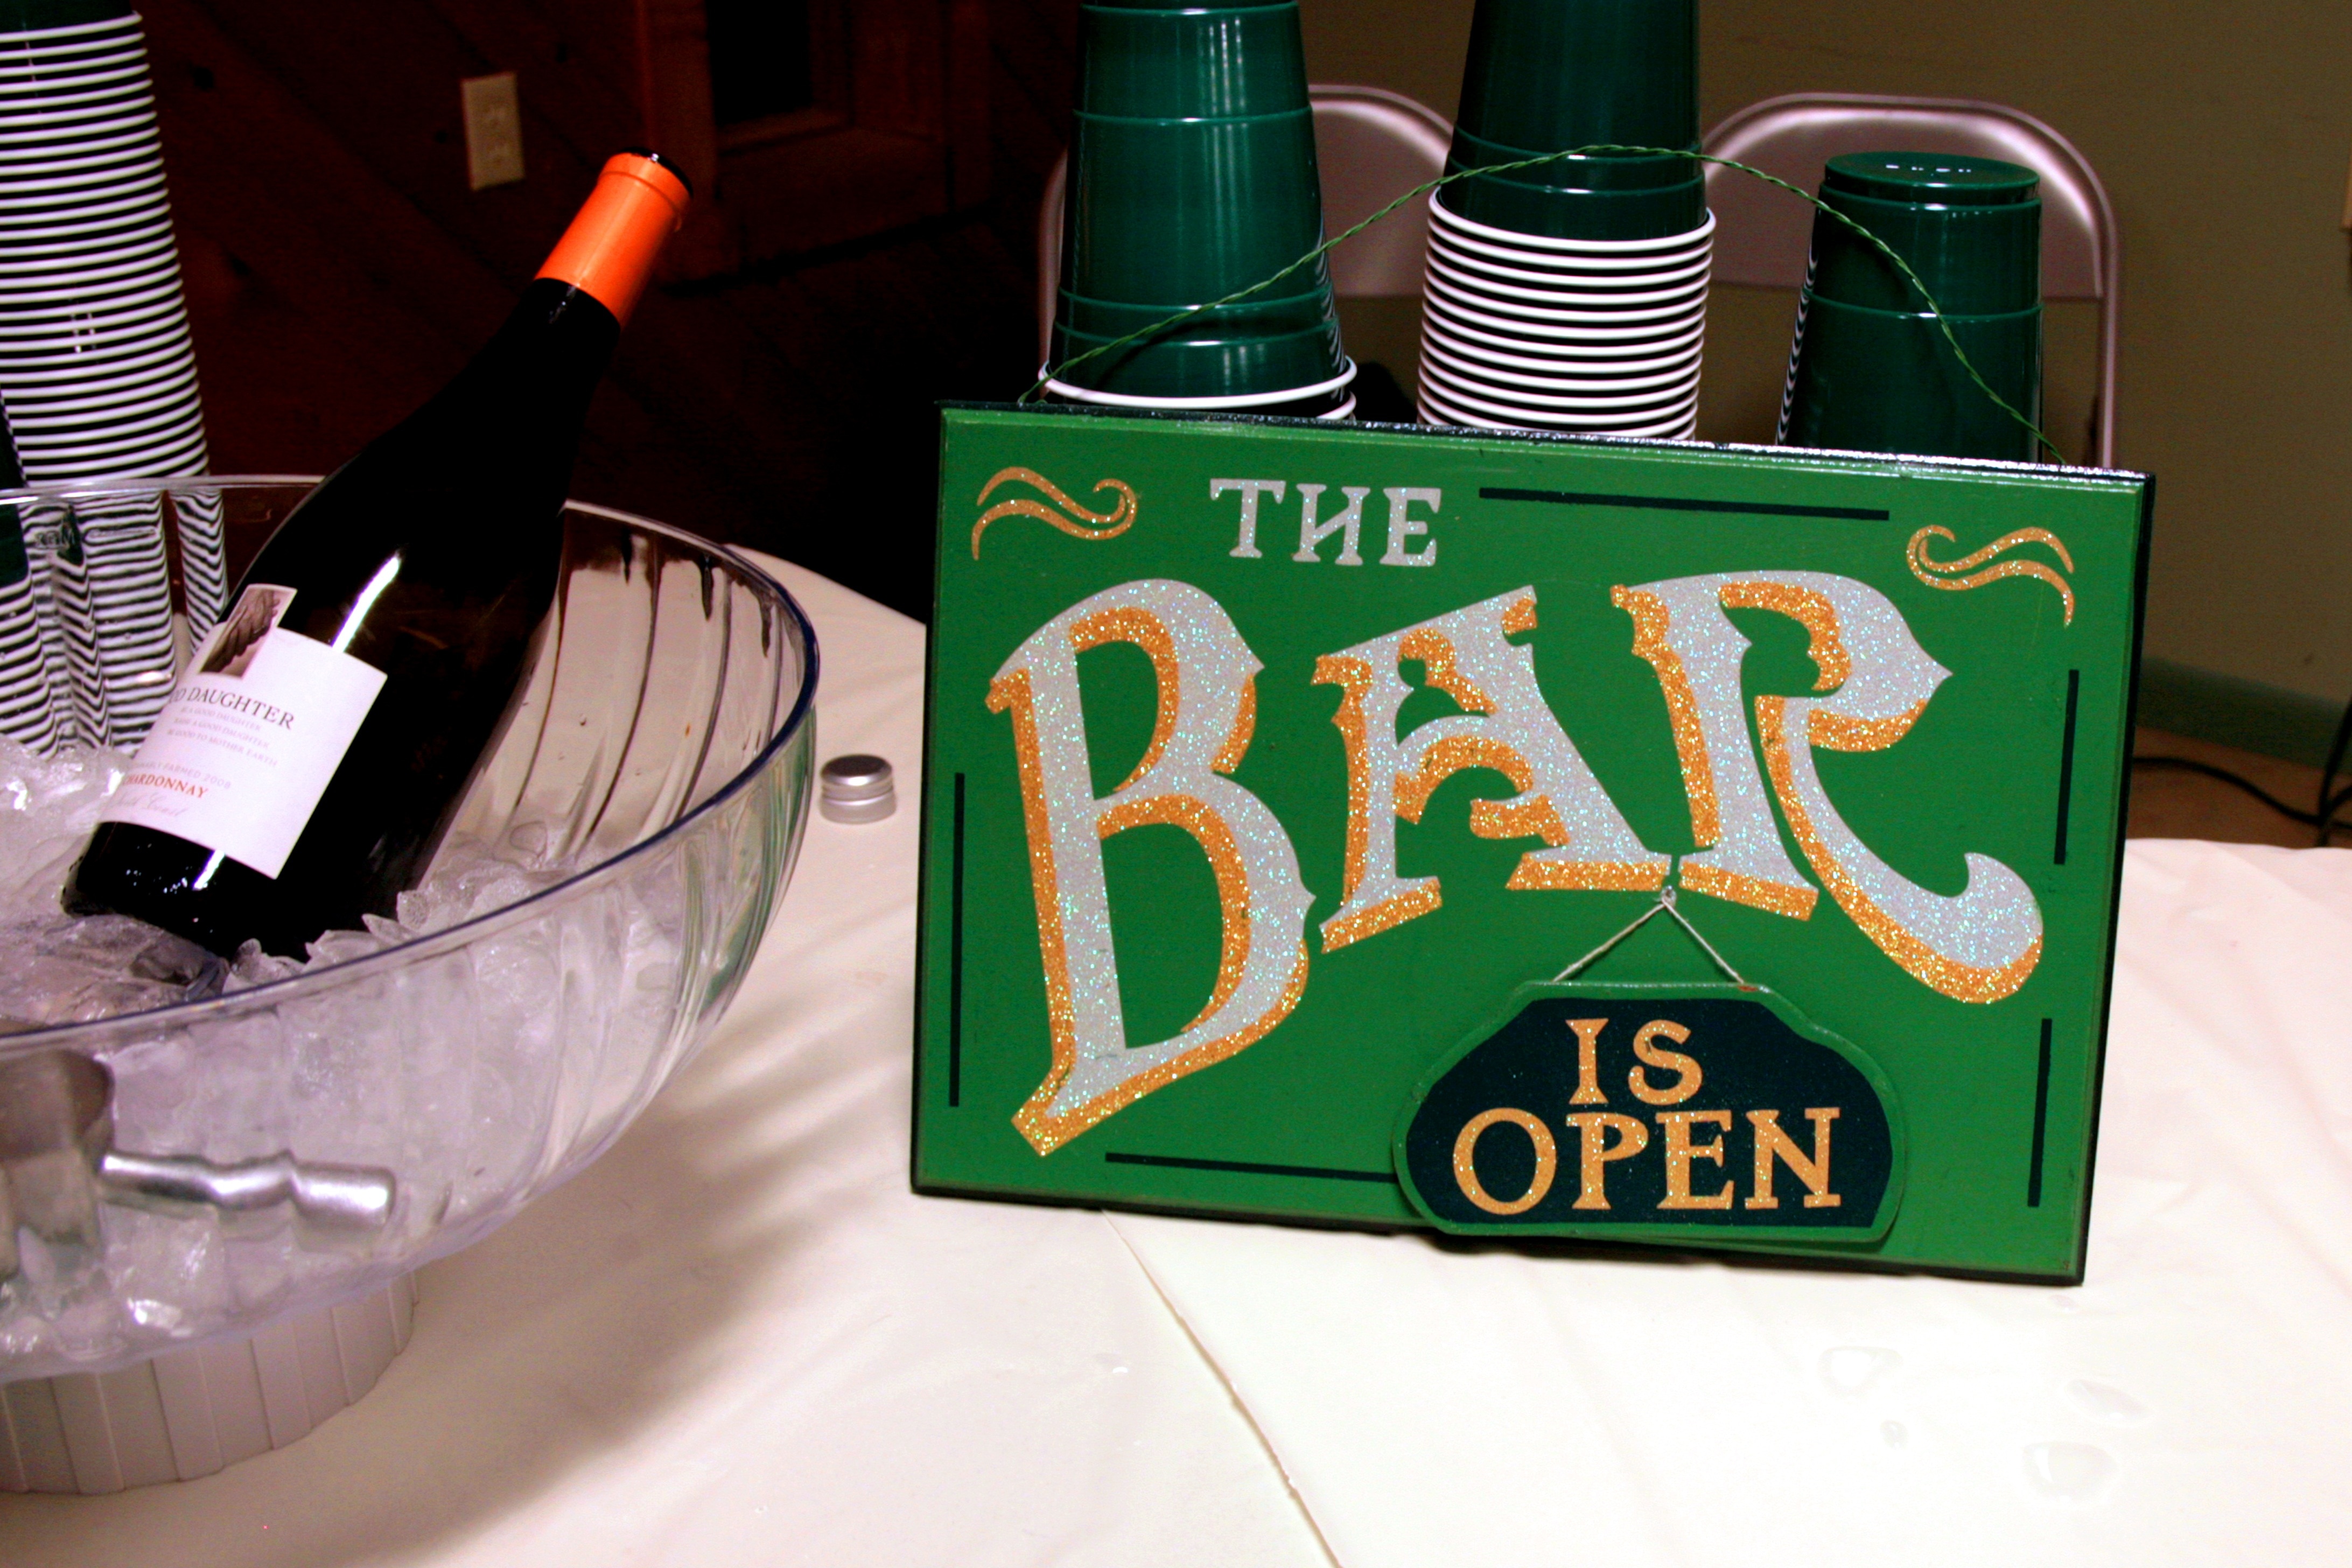 the bar is open box